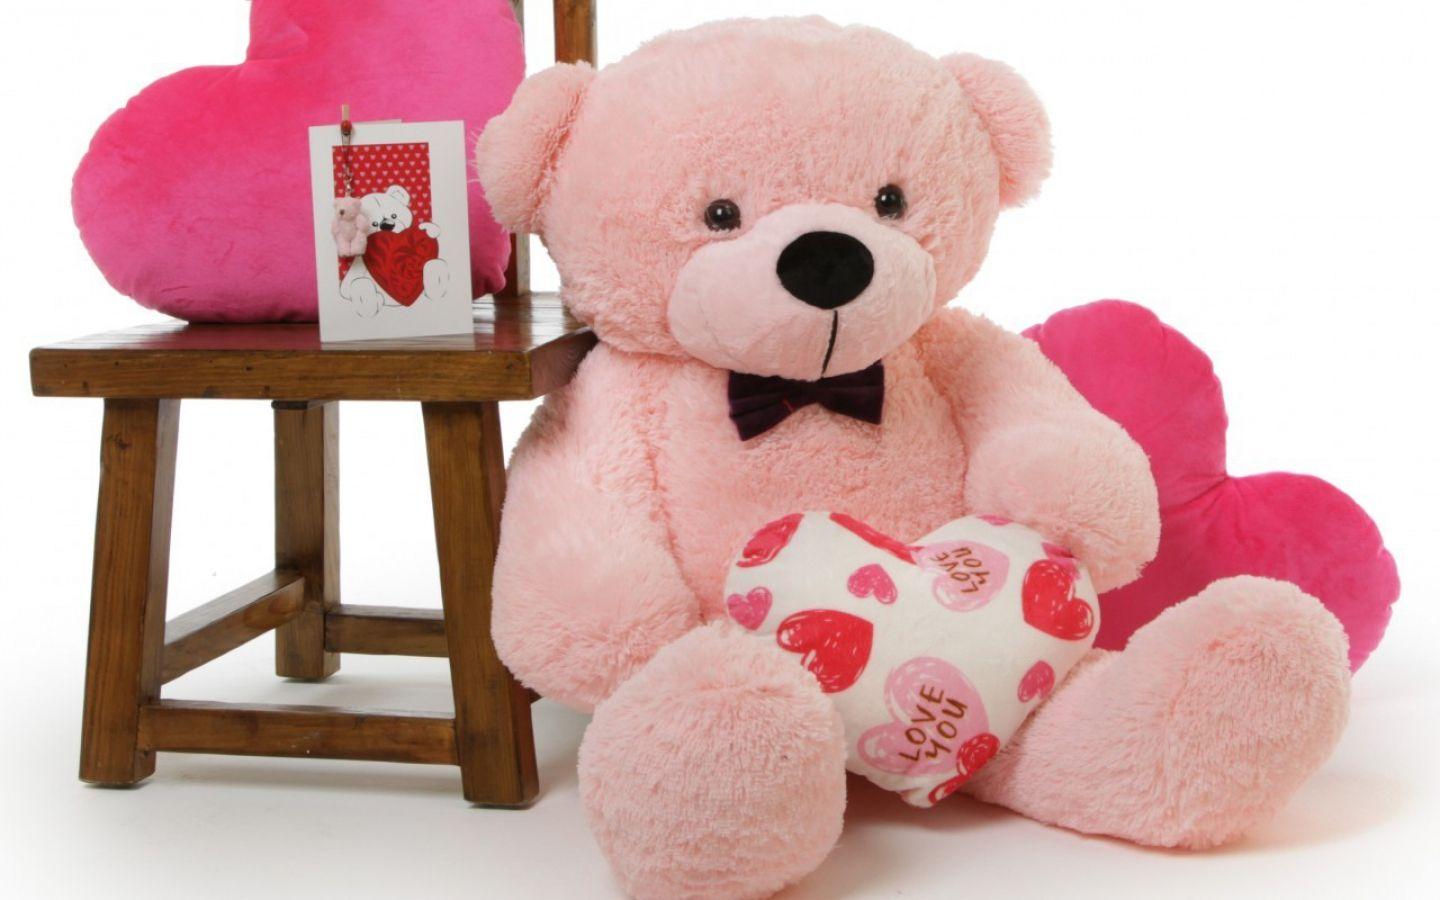 Collection of Teddy Bear Wallpaper on HDWallpaper 720×960 Taddy